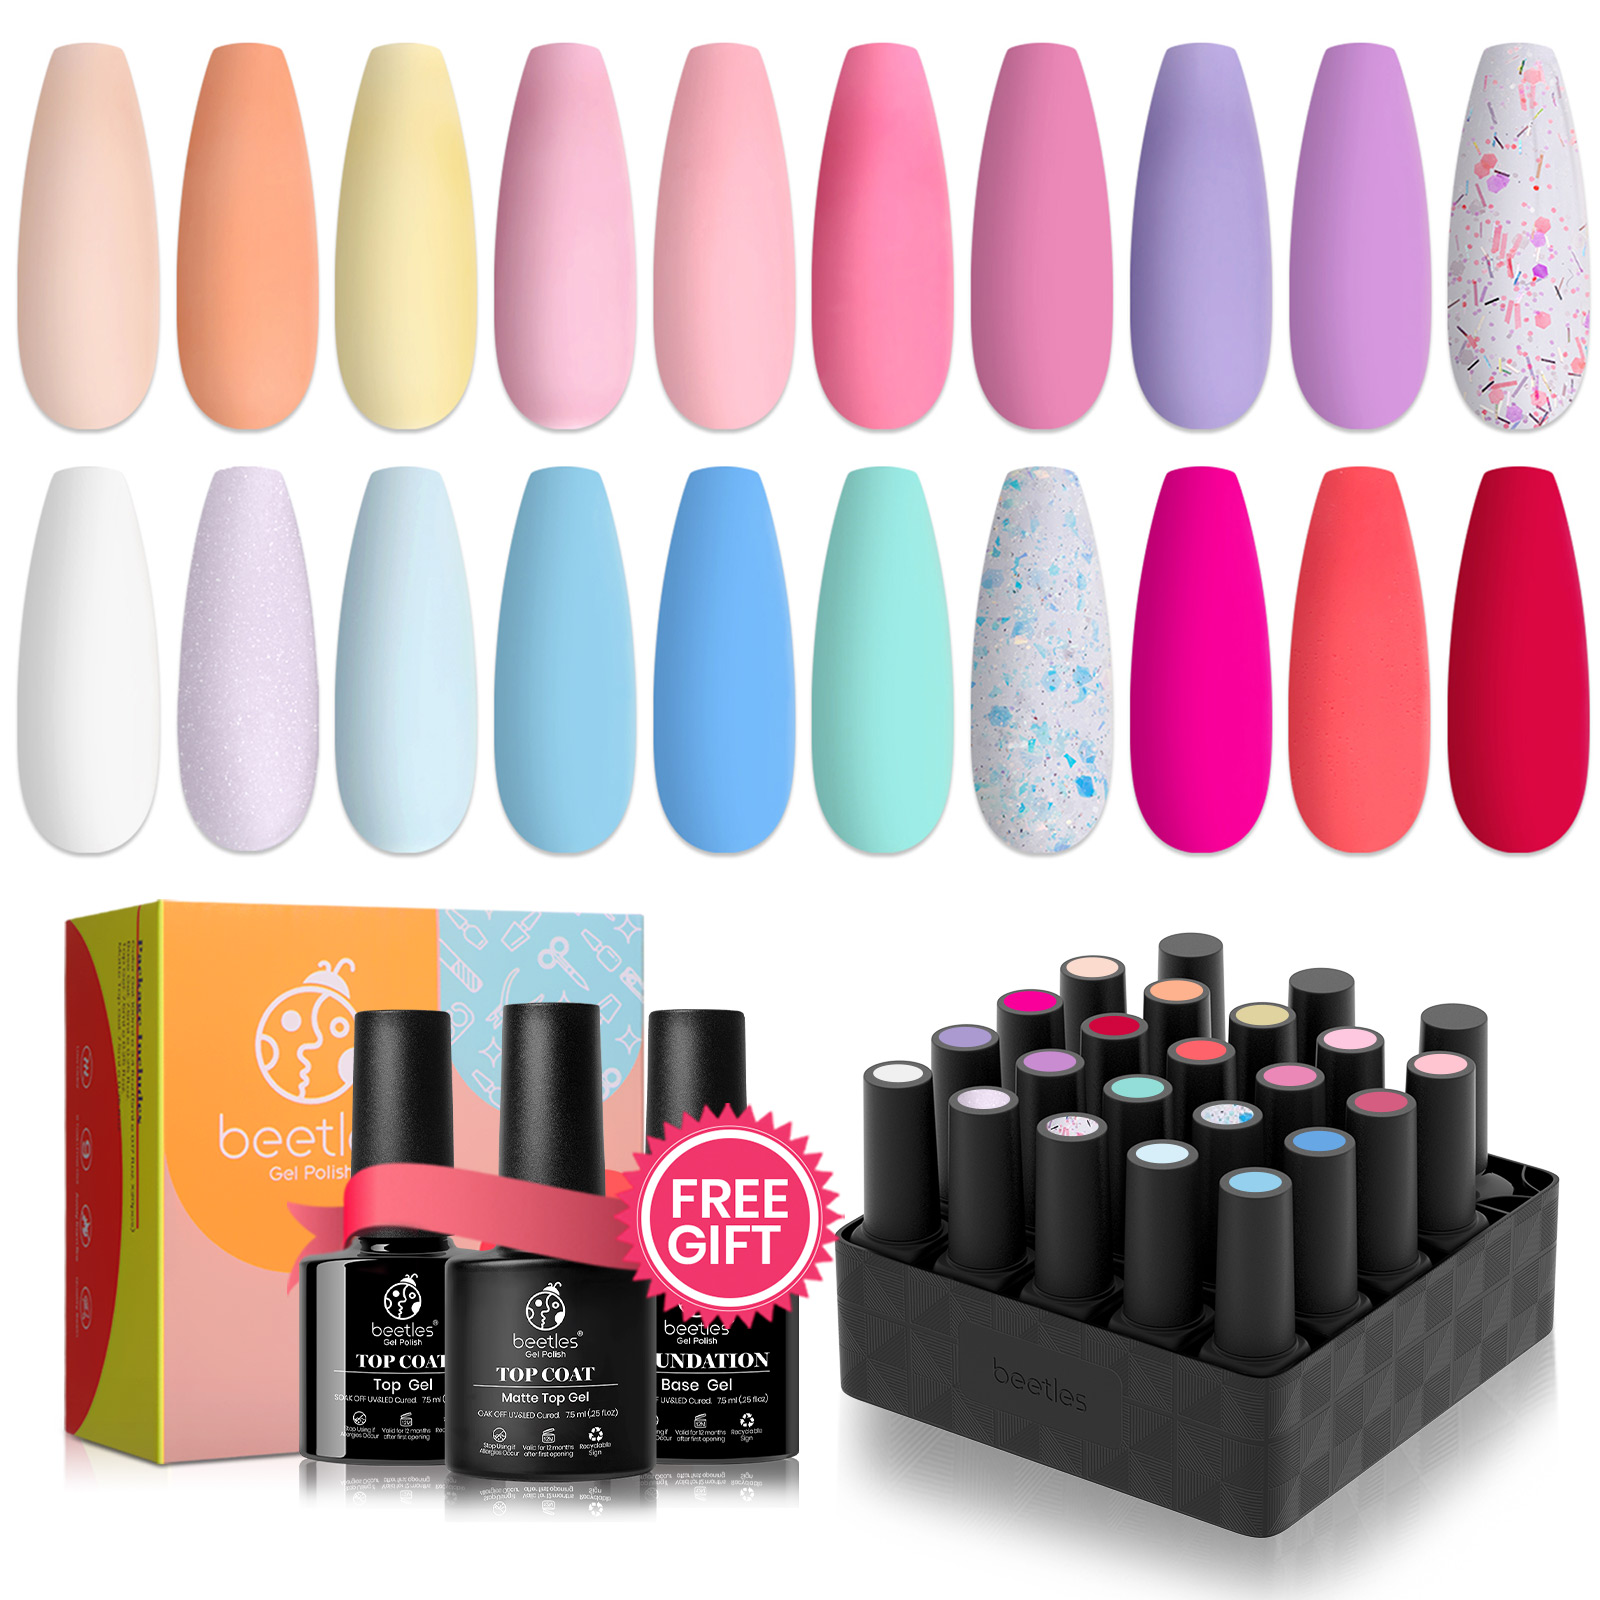 Pastel Gel Nail Polish Kit with Gel Base and Top Coat - 20Pcs Pastel Macaron Colors Collection, Popular Bright Art Sparkle Glitters Colors Easter Decorations Valentine Gift for Her